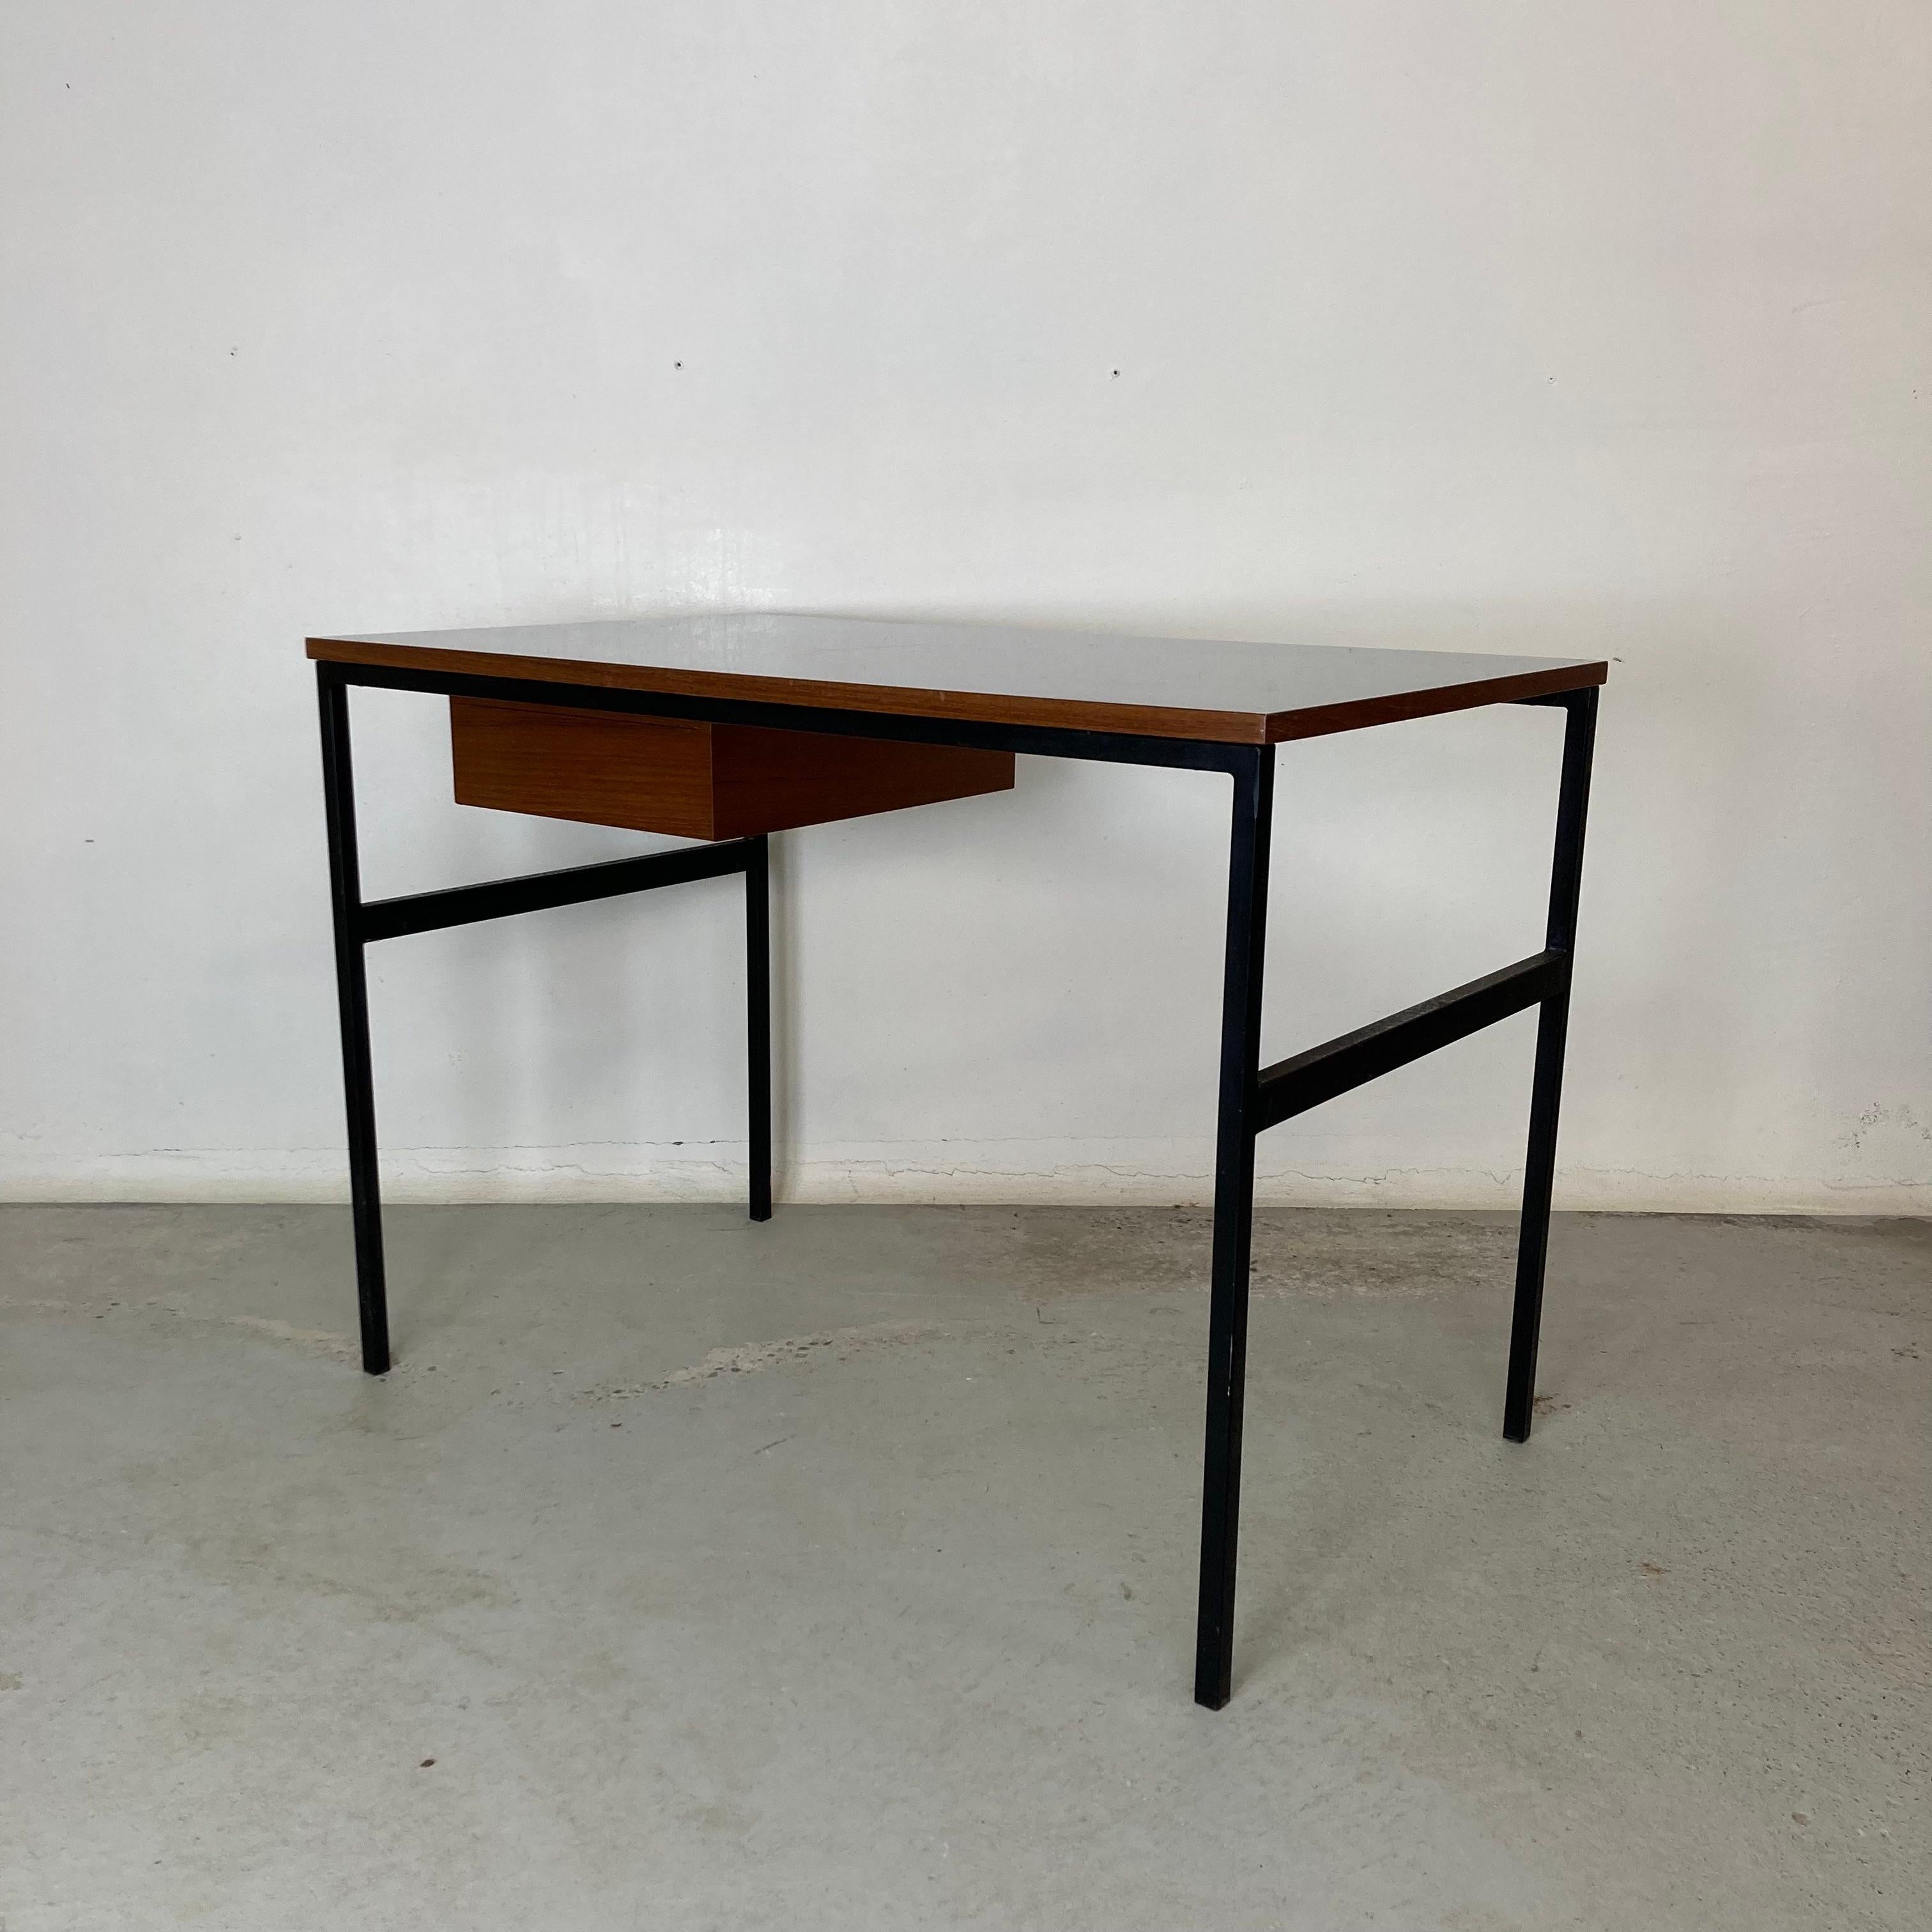 Mid-20th Century Pierre Paulin & Thonet Desk with Drawer, Metal Teak & Formica, France Circa 1955 For Sale